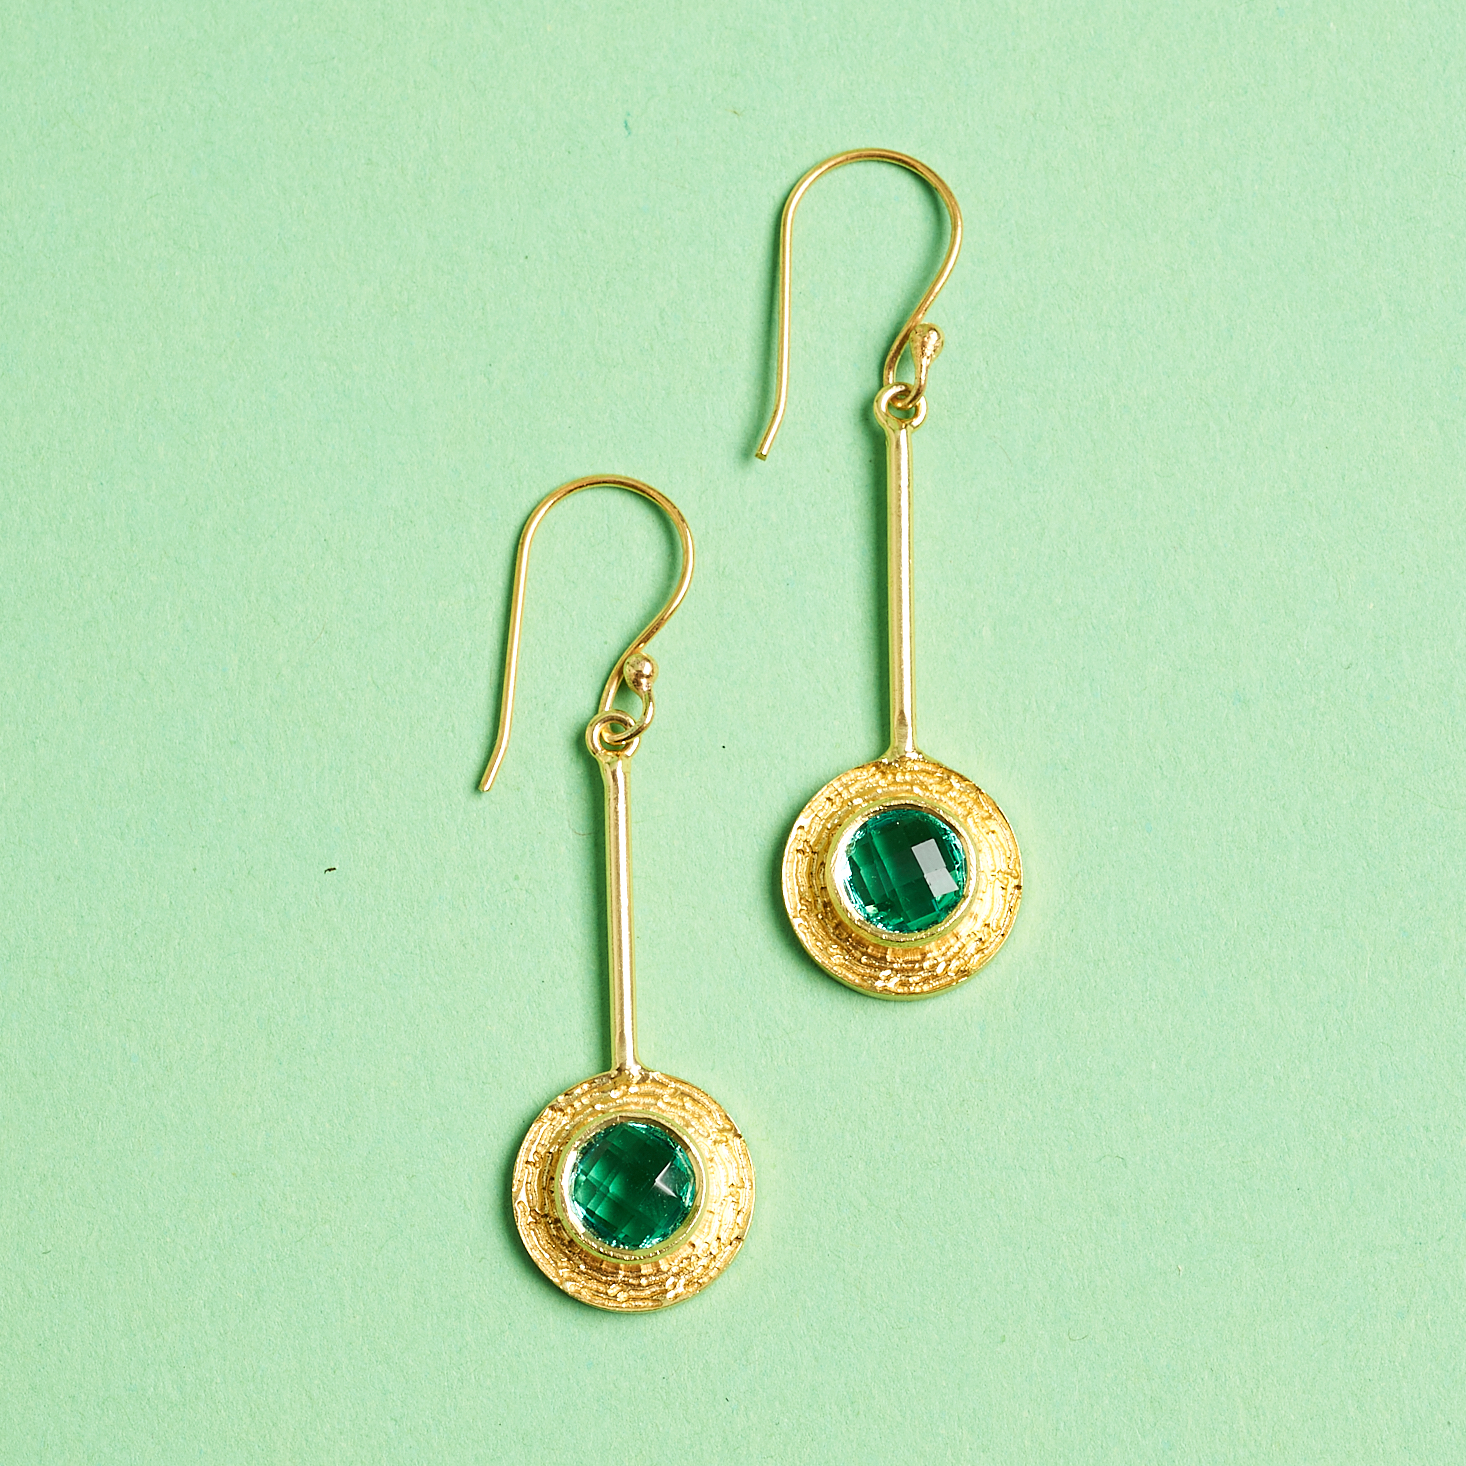 deco inspired earrings with green stone